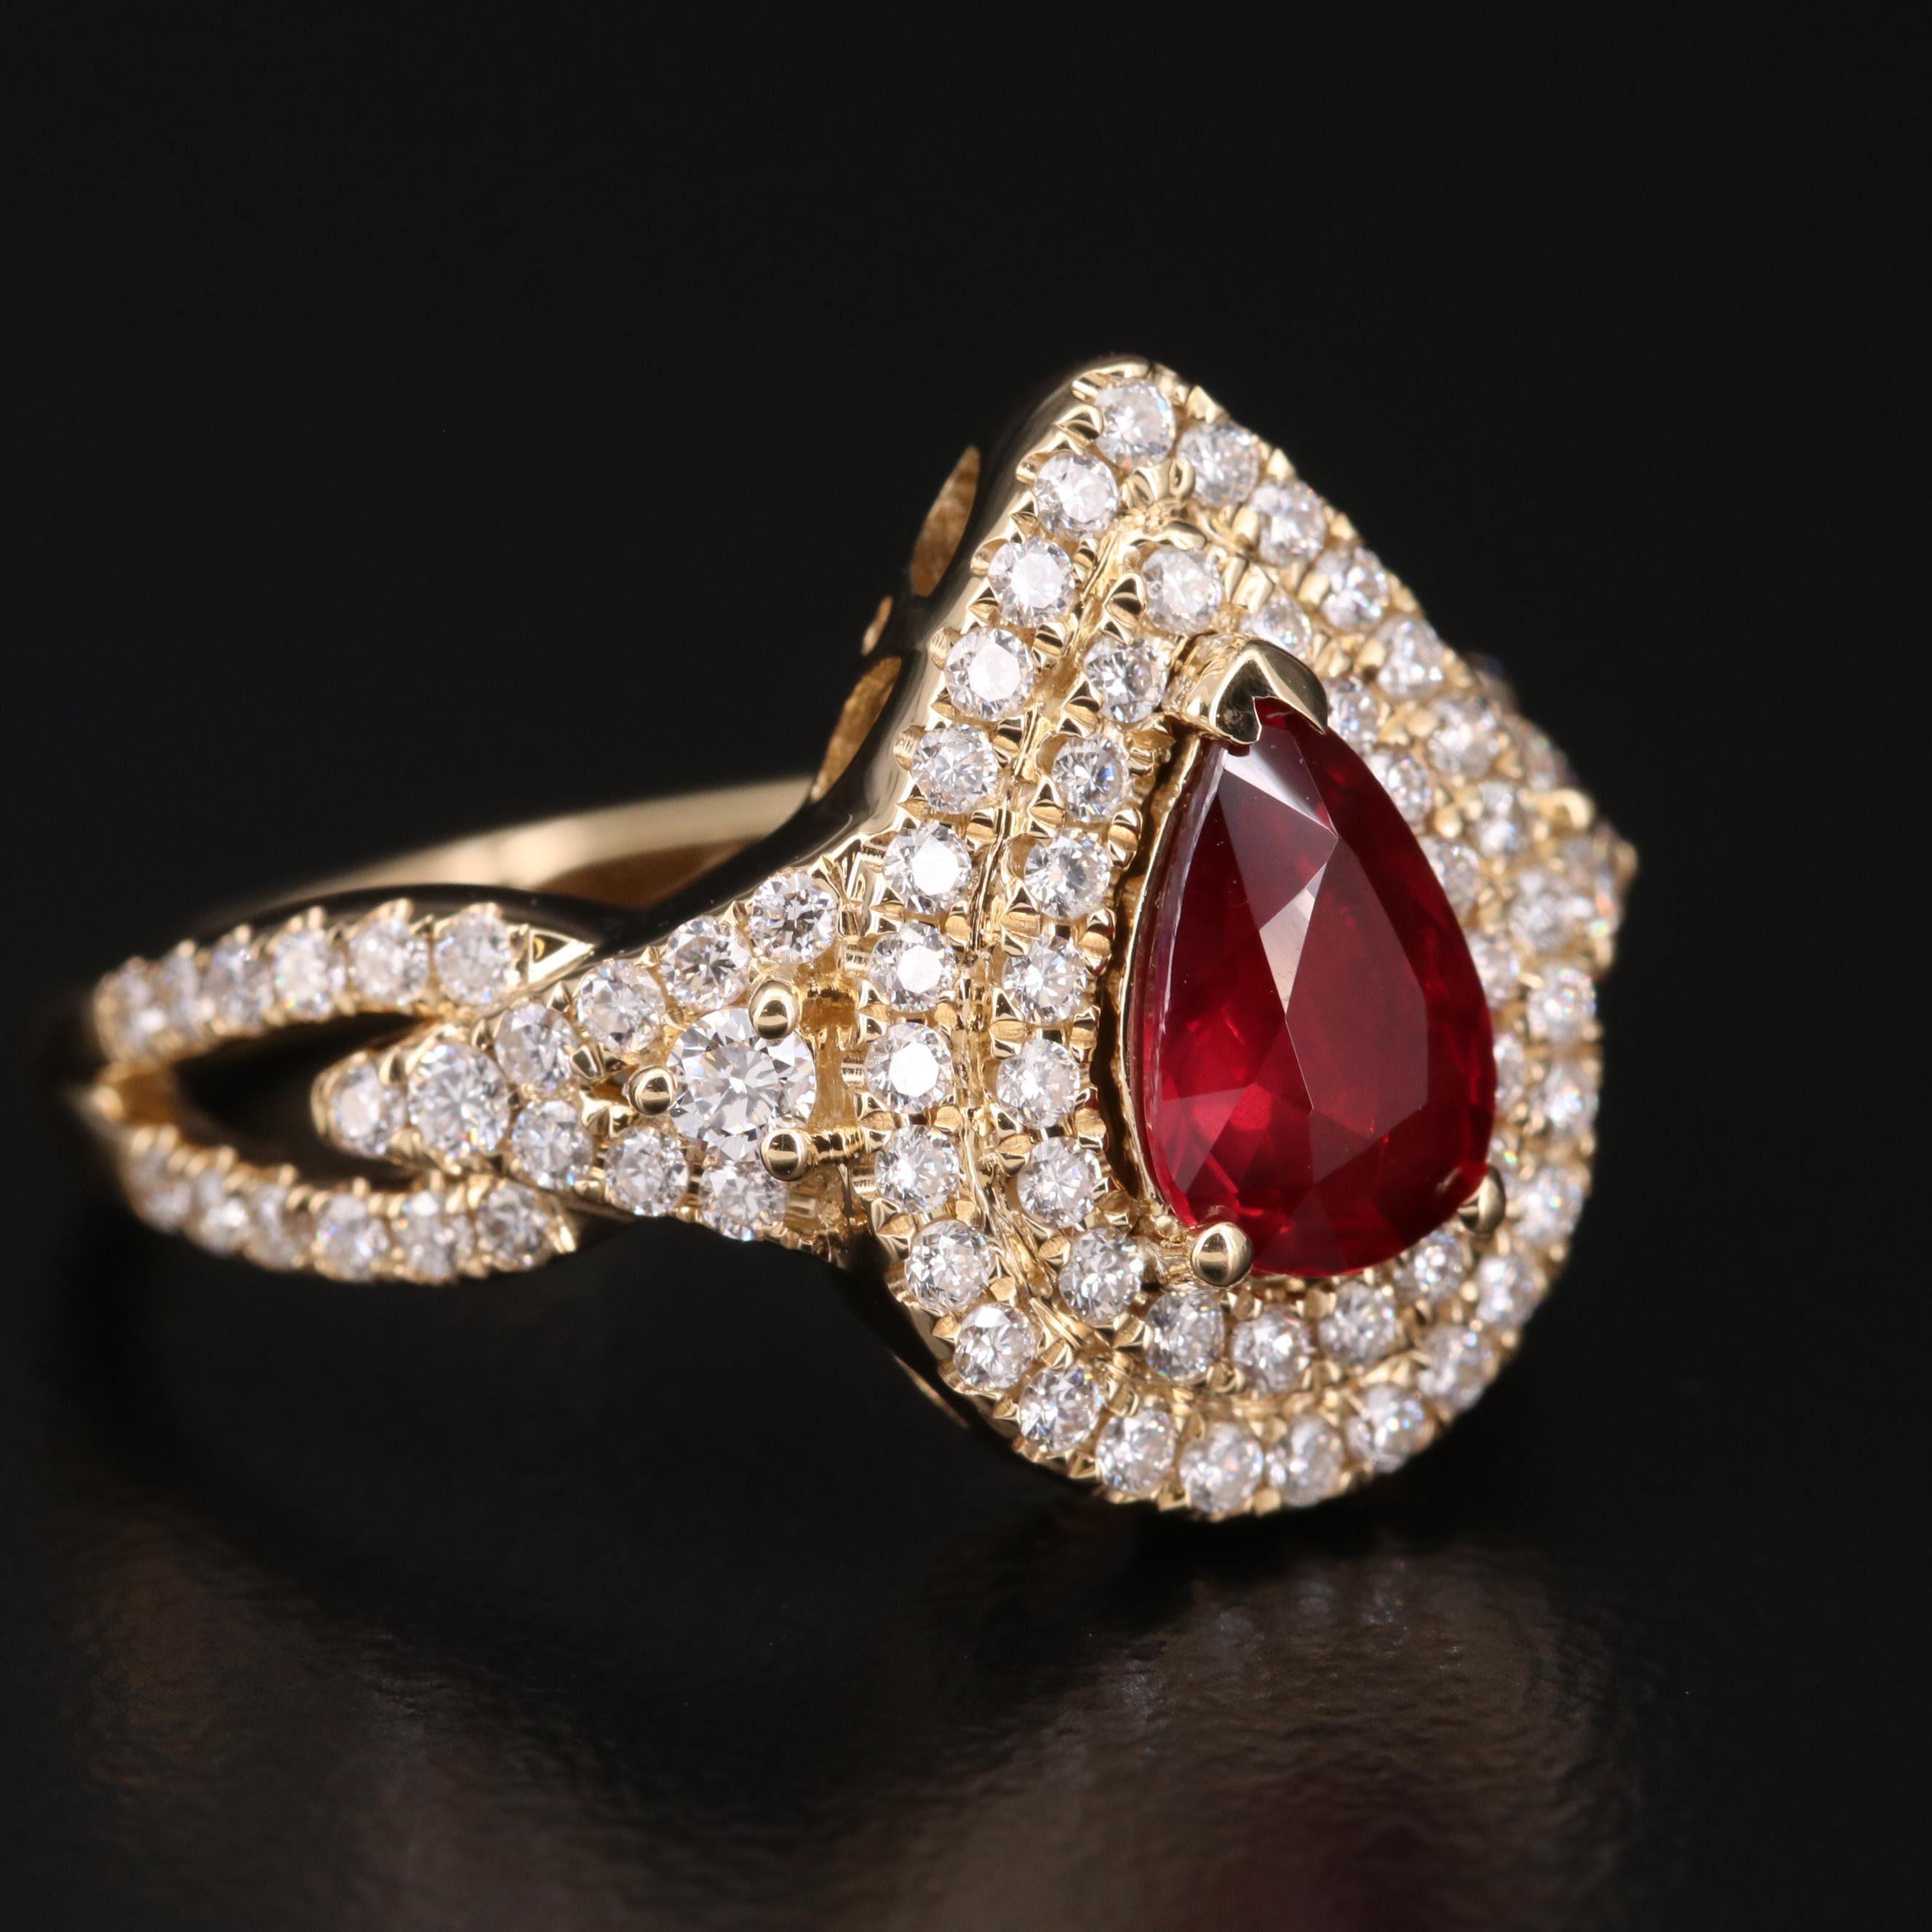 For Sale:  Halo Pear Cut Ruby Engagement Ring Ruby Diamond Yellow Gold Wedding Ring  2